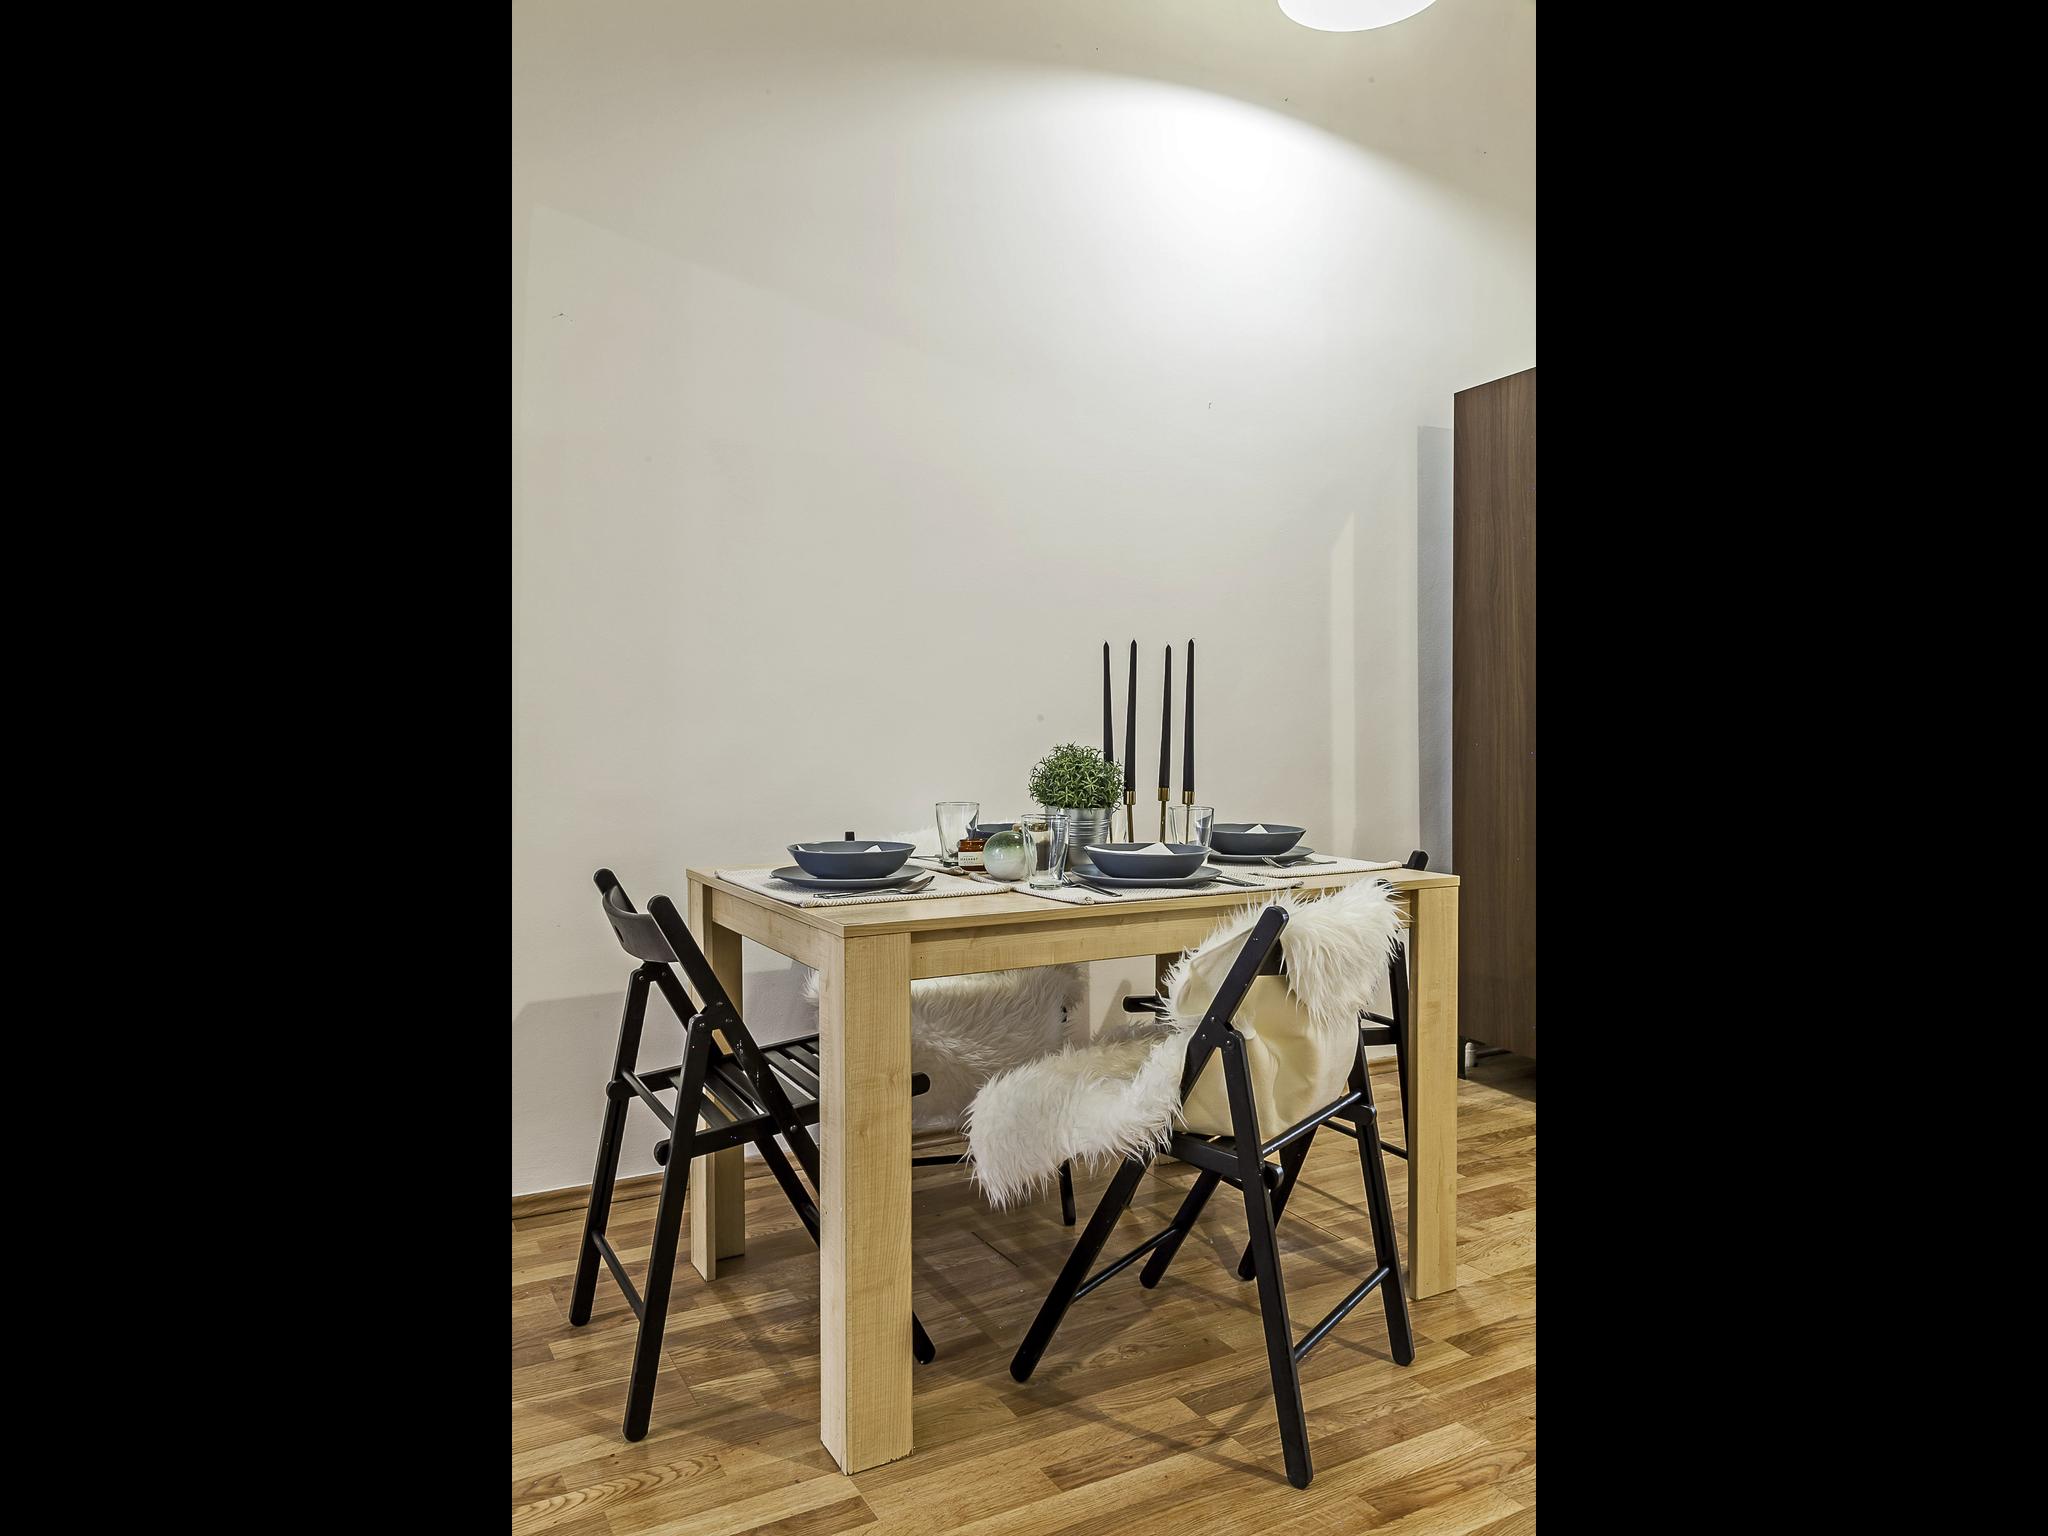 Nagymez 2 - Room for rent in Budapest